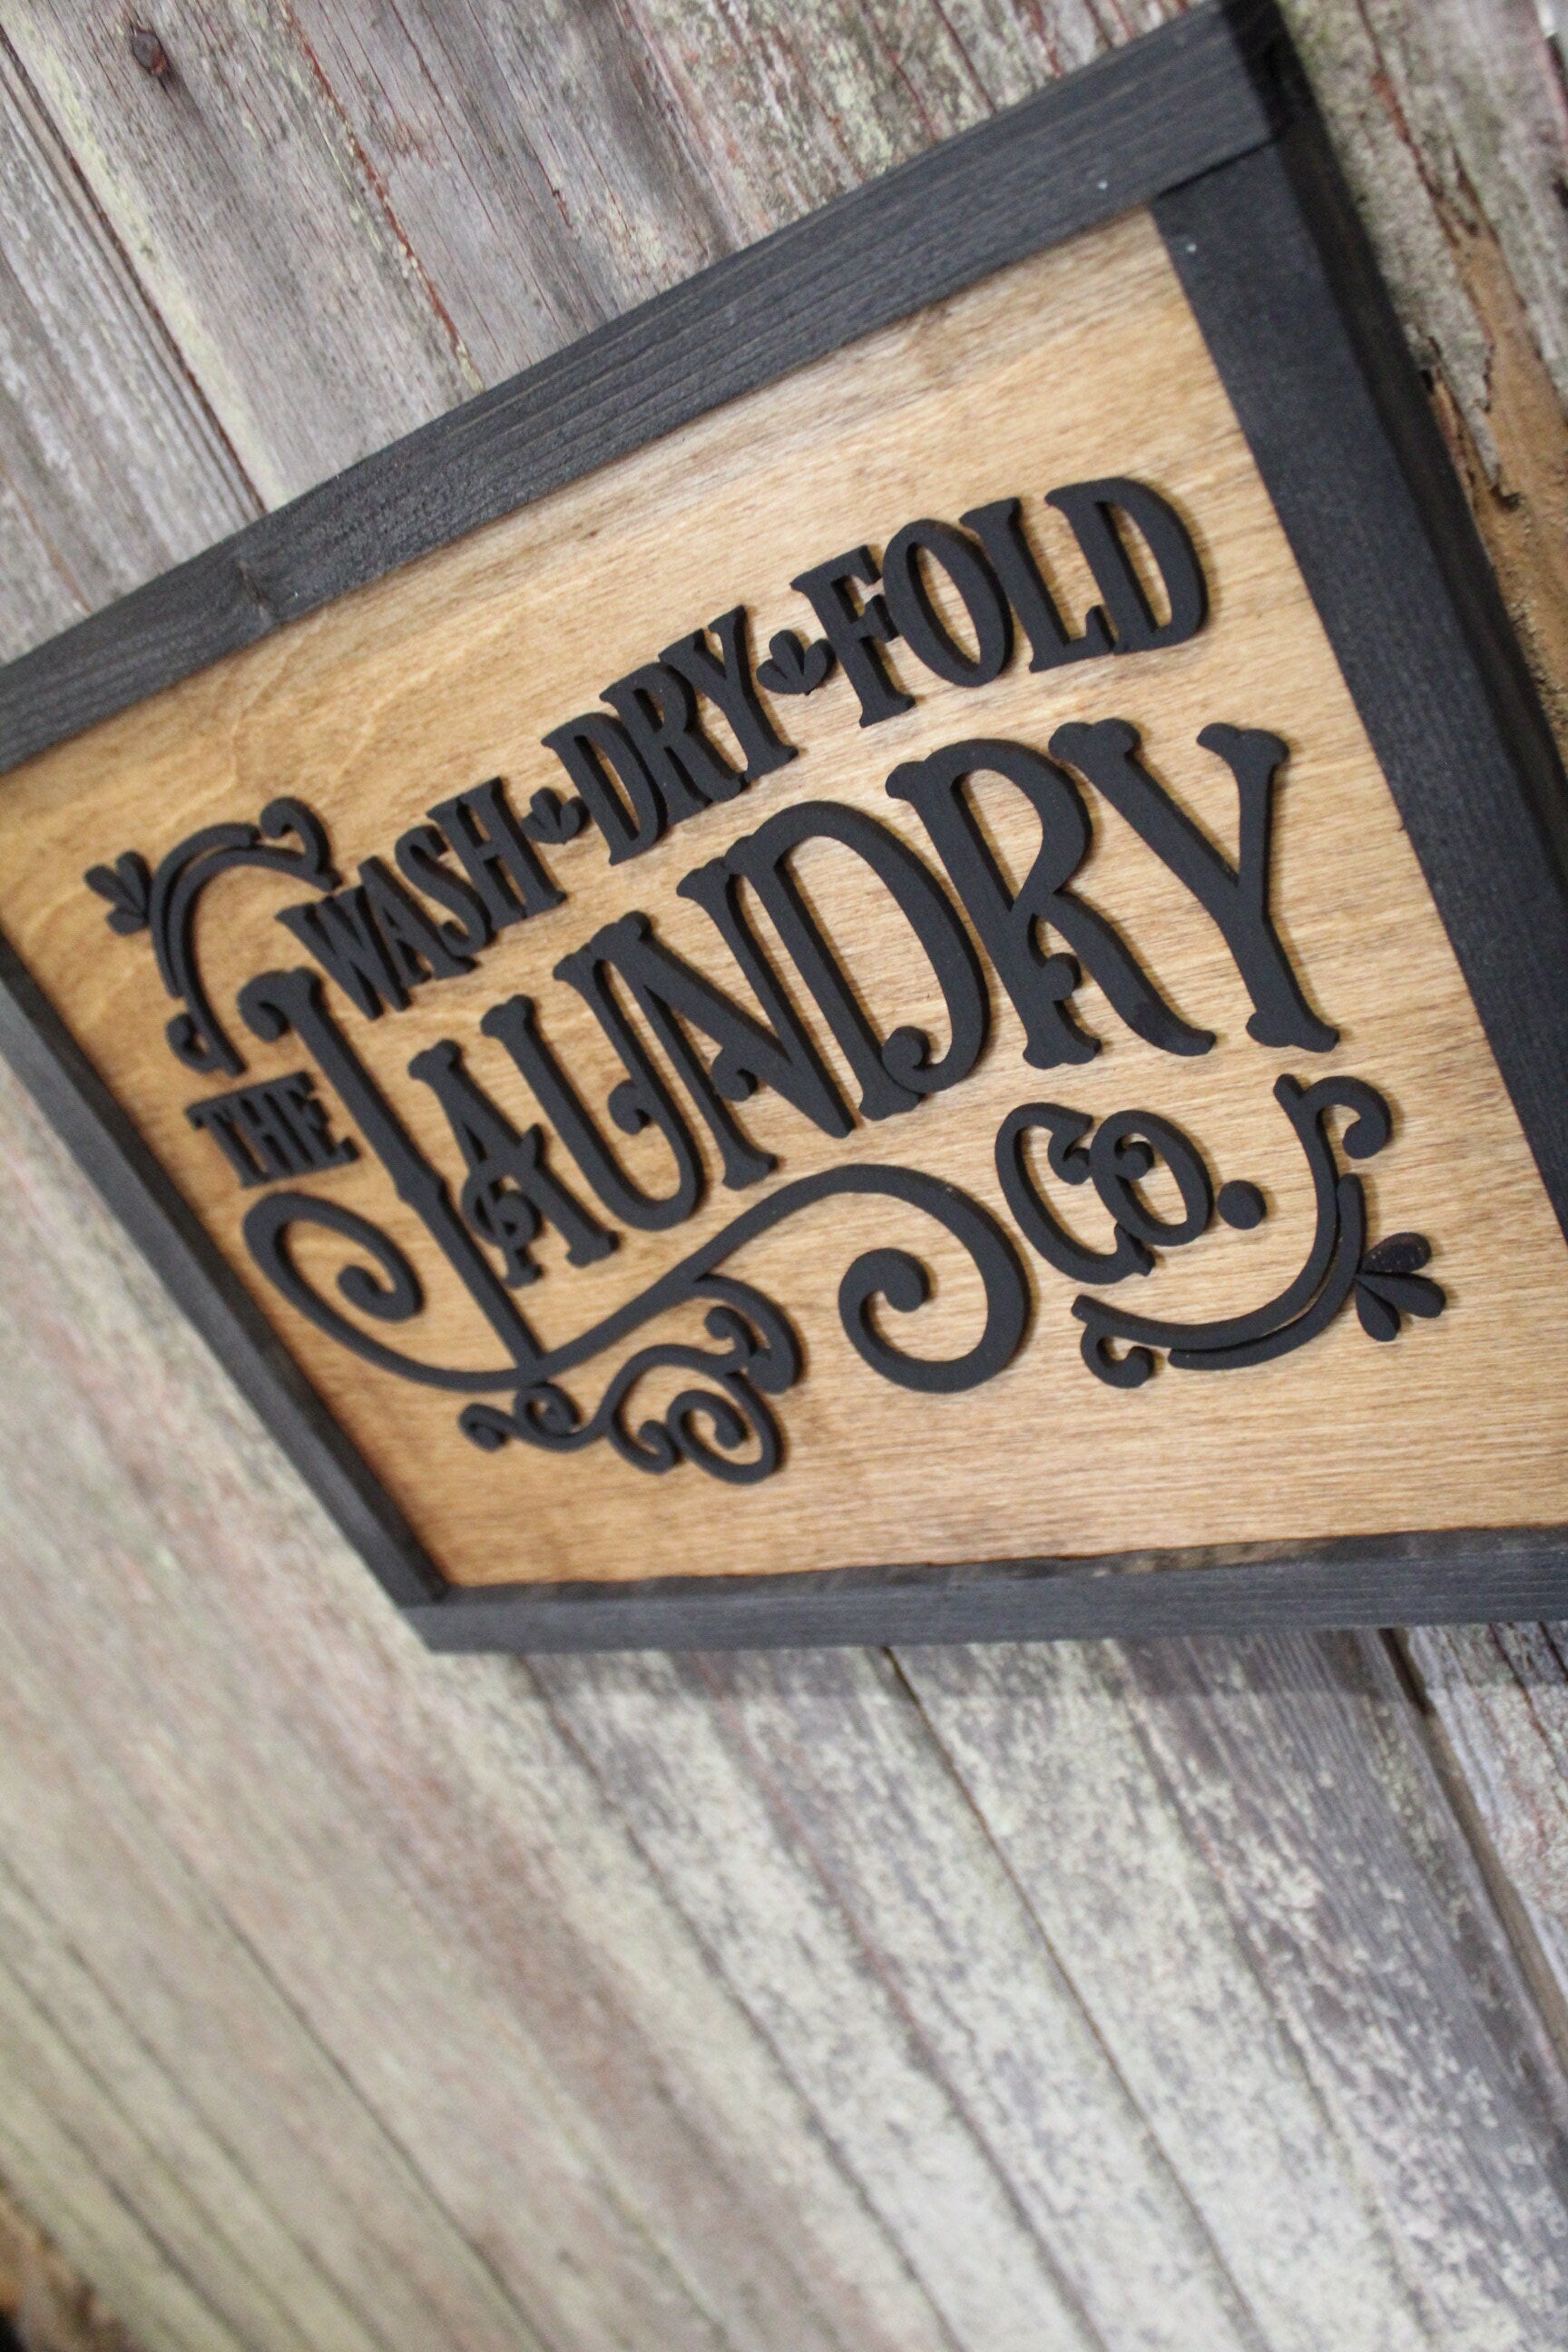 Laundry Room Filigree Scroll Work Hanging Wall Sign Wash Dry Fold 3D Raised Text Black Rustic Primitive Country Barn wood Laser Text Framed